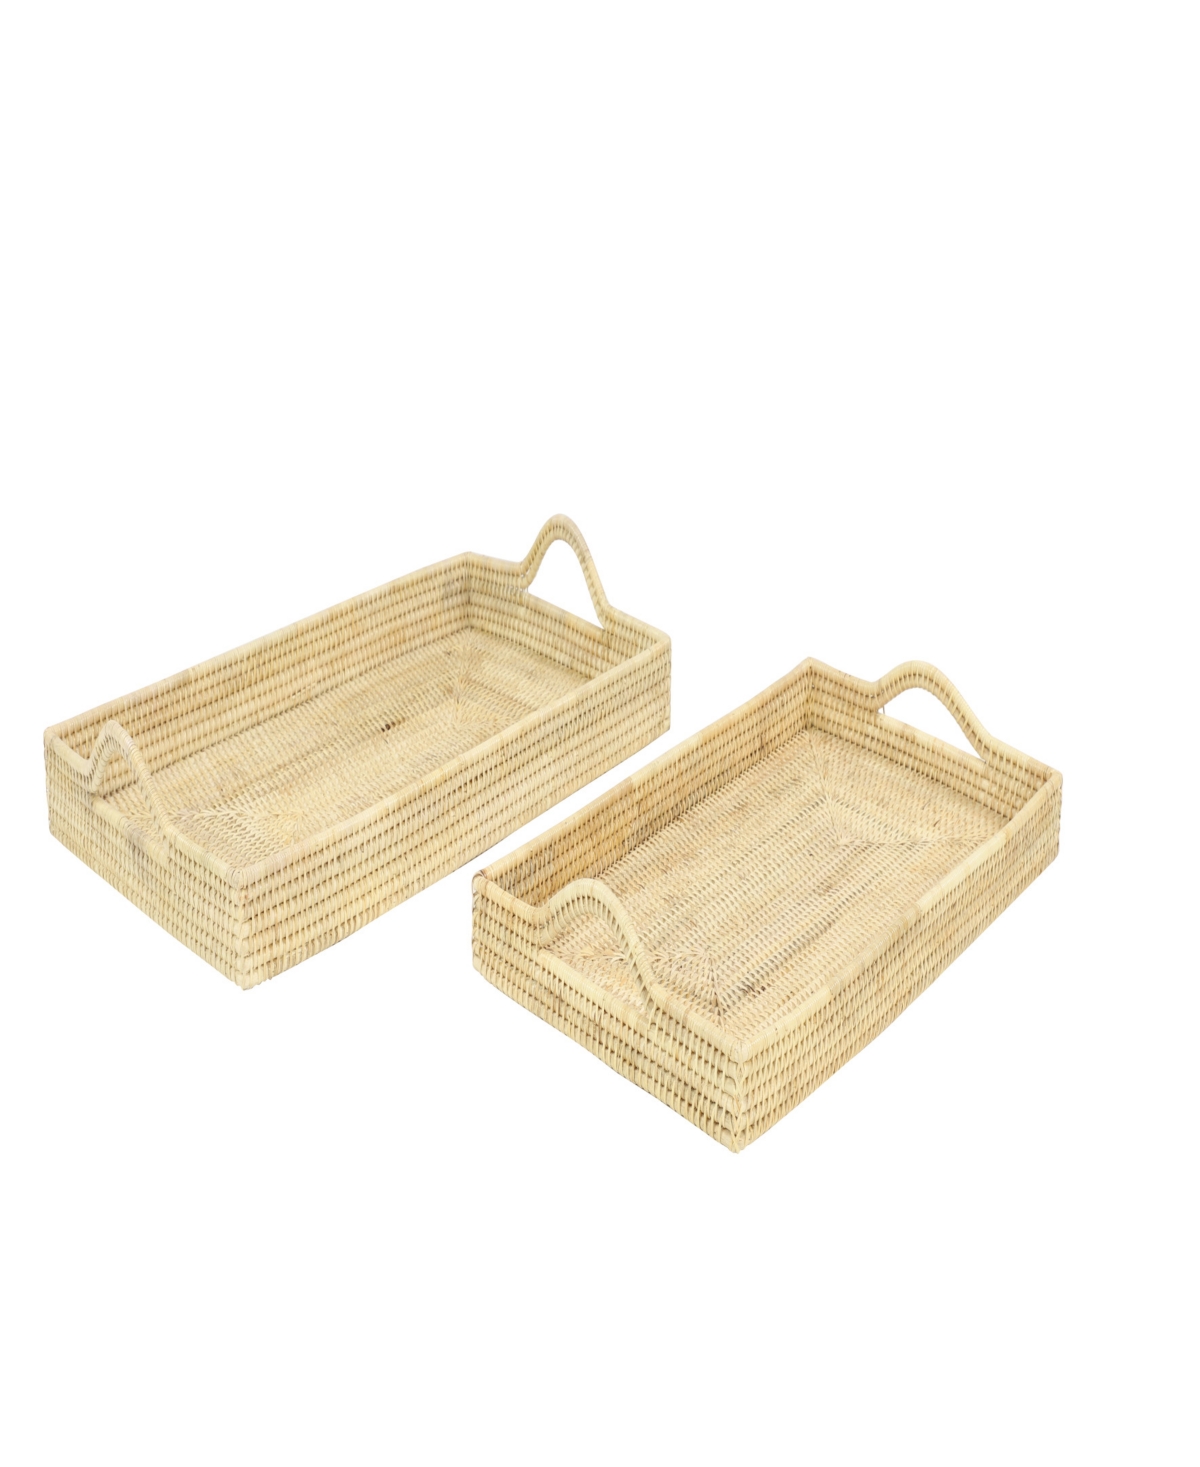 Rosemary Lane Rattan Tray, Set Of 2, 26", 23" W In Light Brown